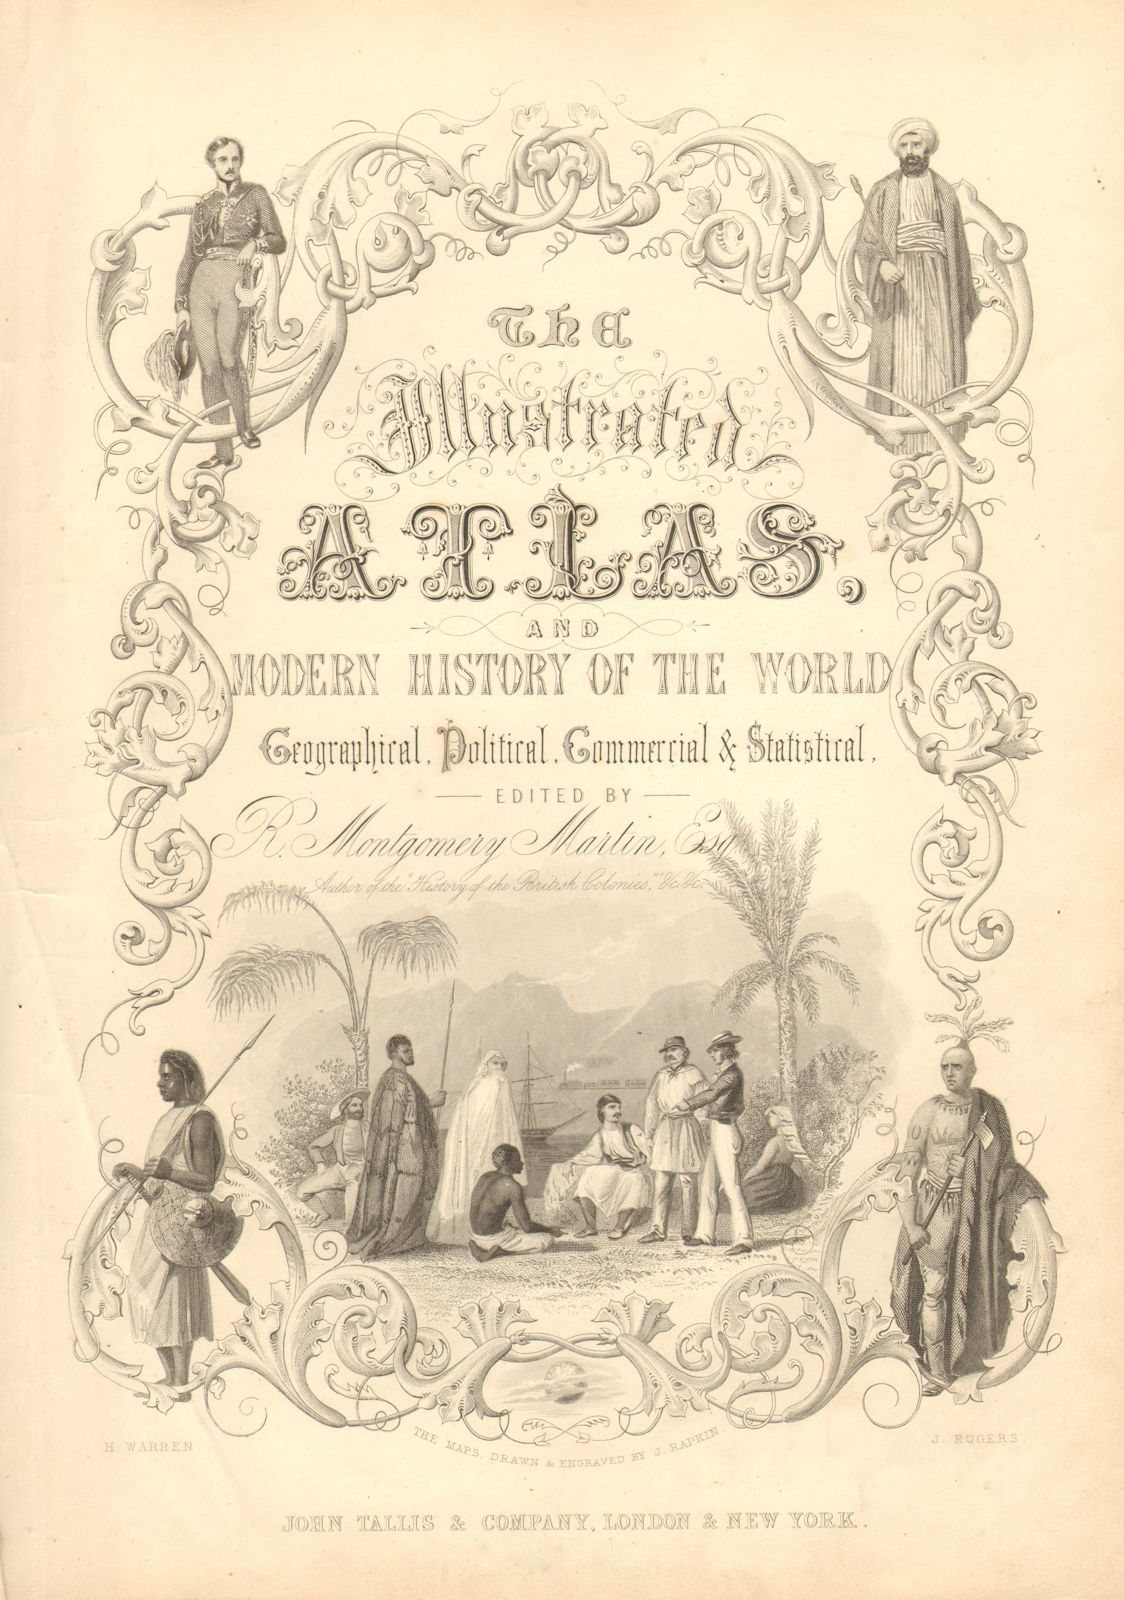 TALLIS ILLUSTRATED ATLAS TITLE PAGE. Figures represent 4 continents 1851 print